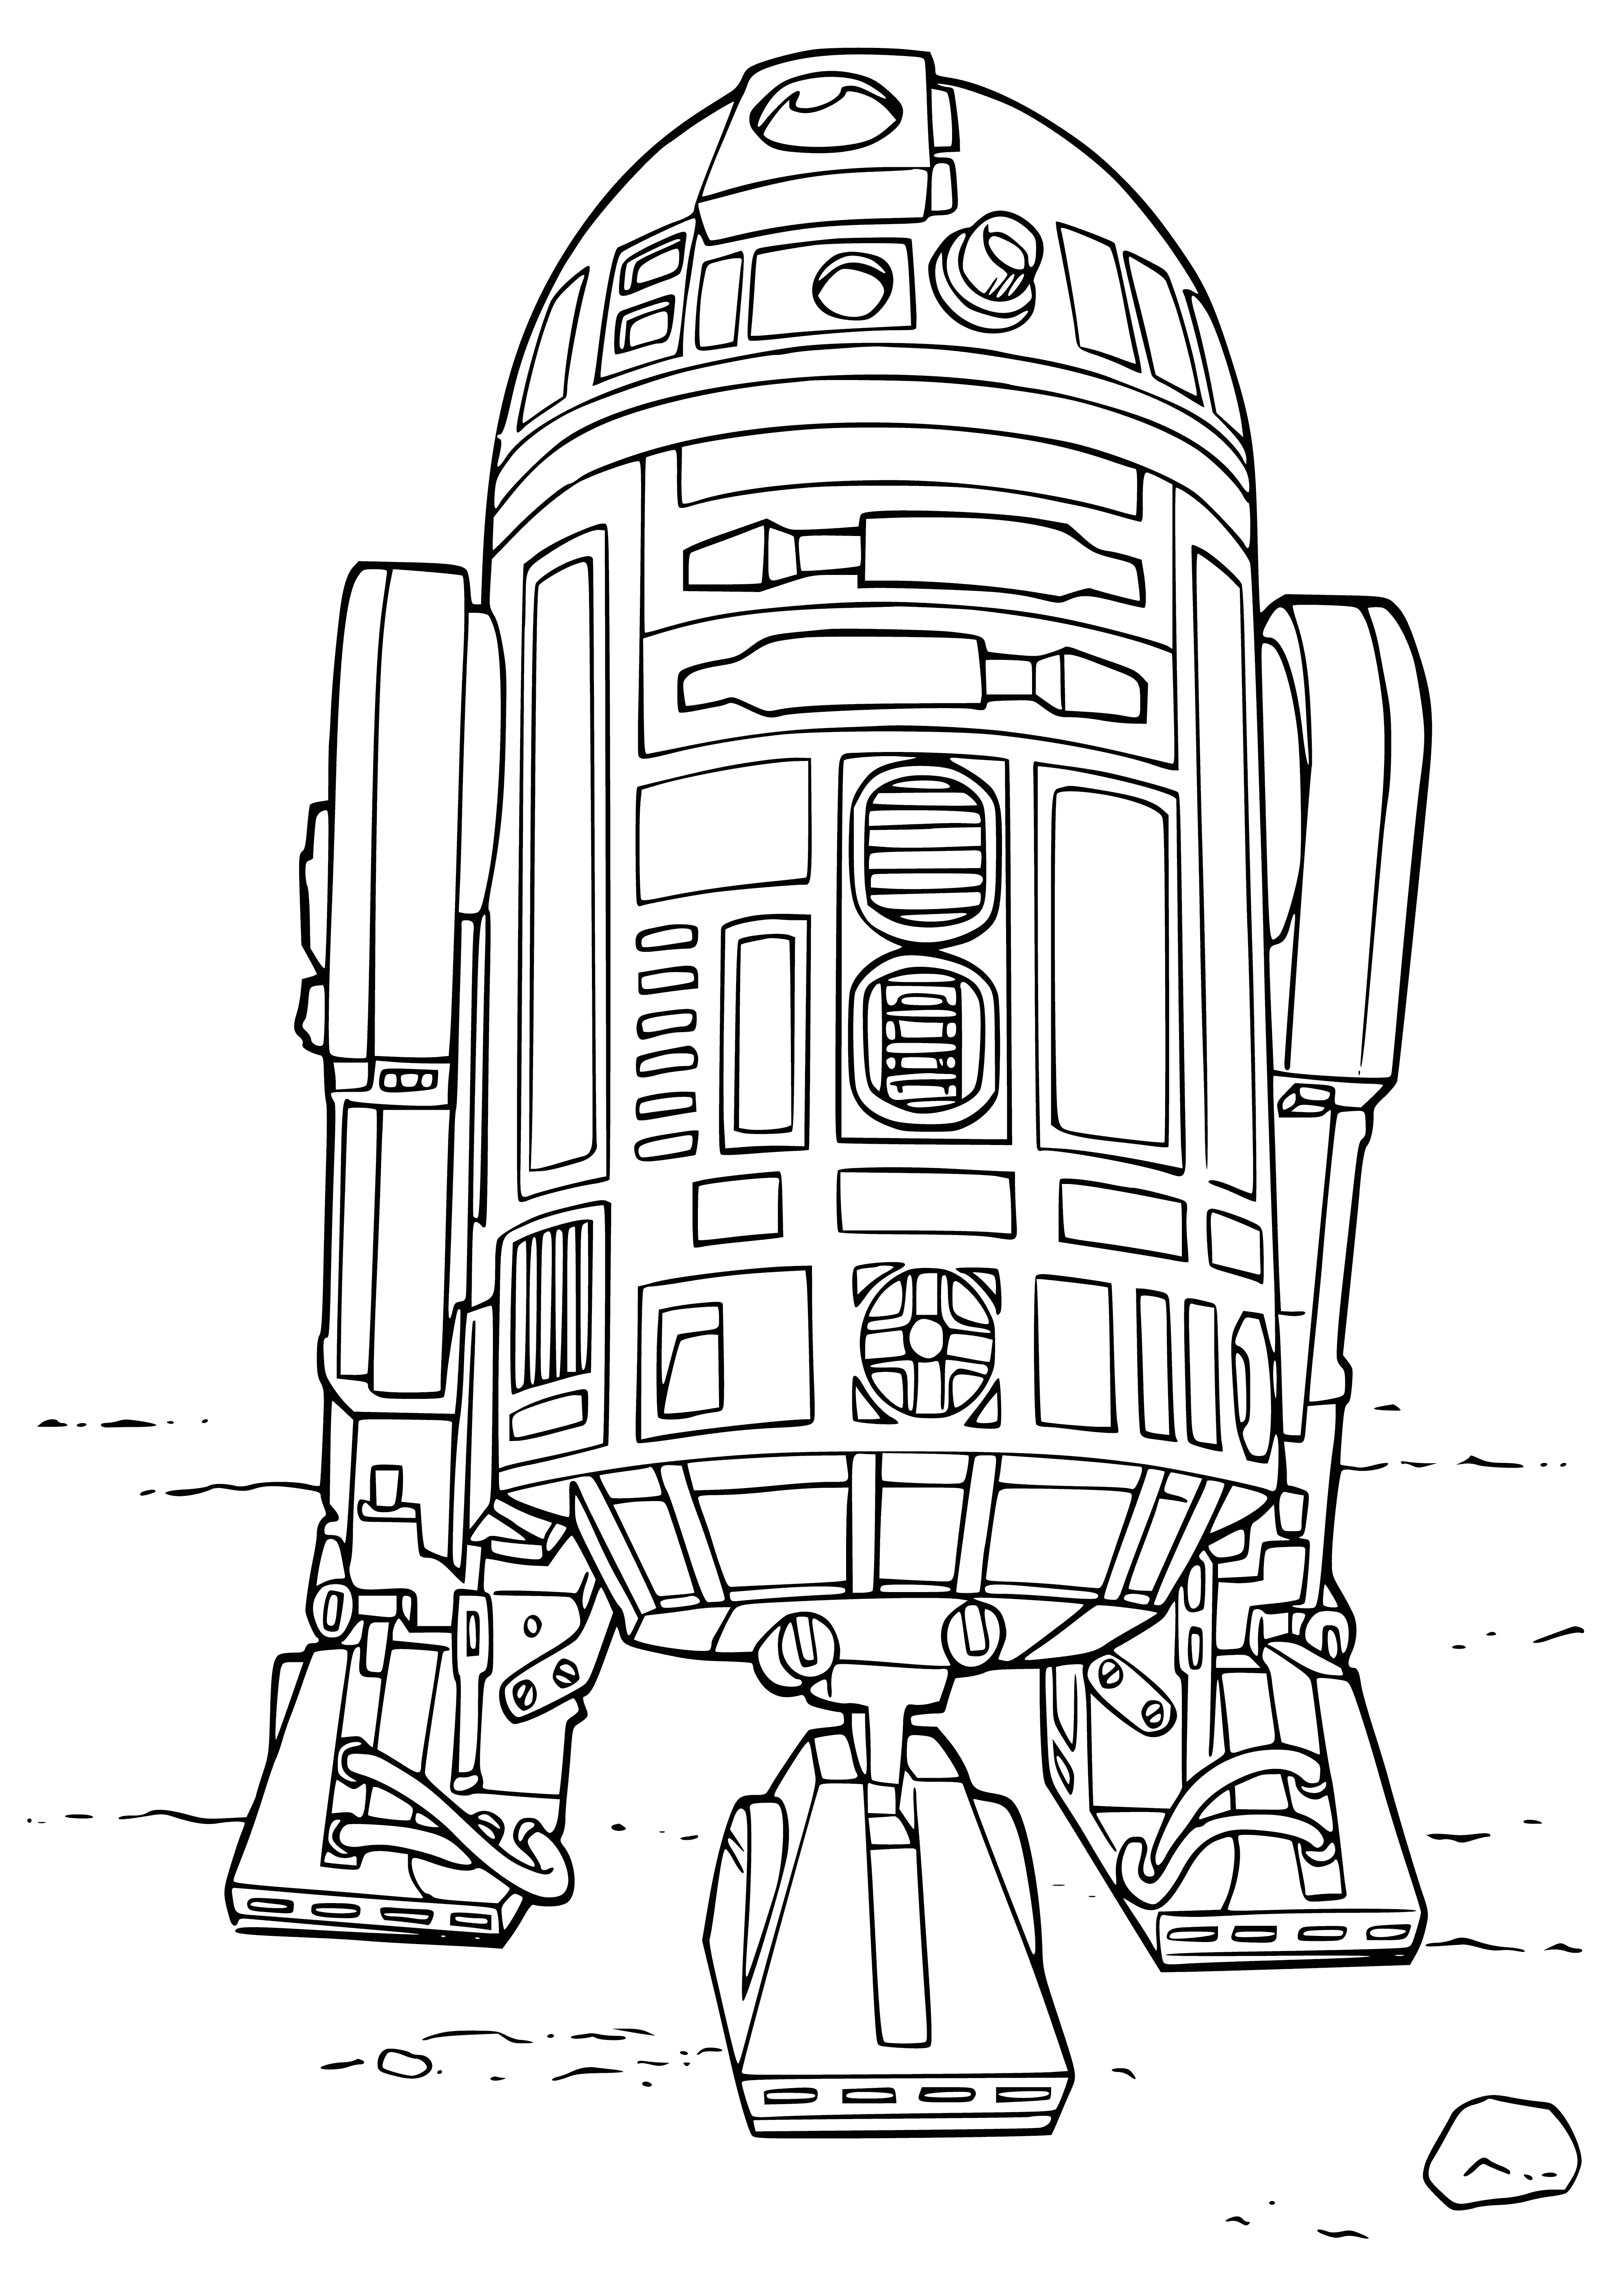 coloring page: R2-D2 is a utility droid, with cylindrical body, single blue eye, and 2 arms & legs-used to repair ships & computer systems in Star Wars.